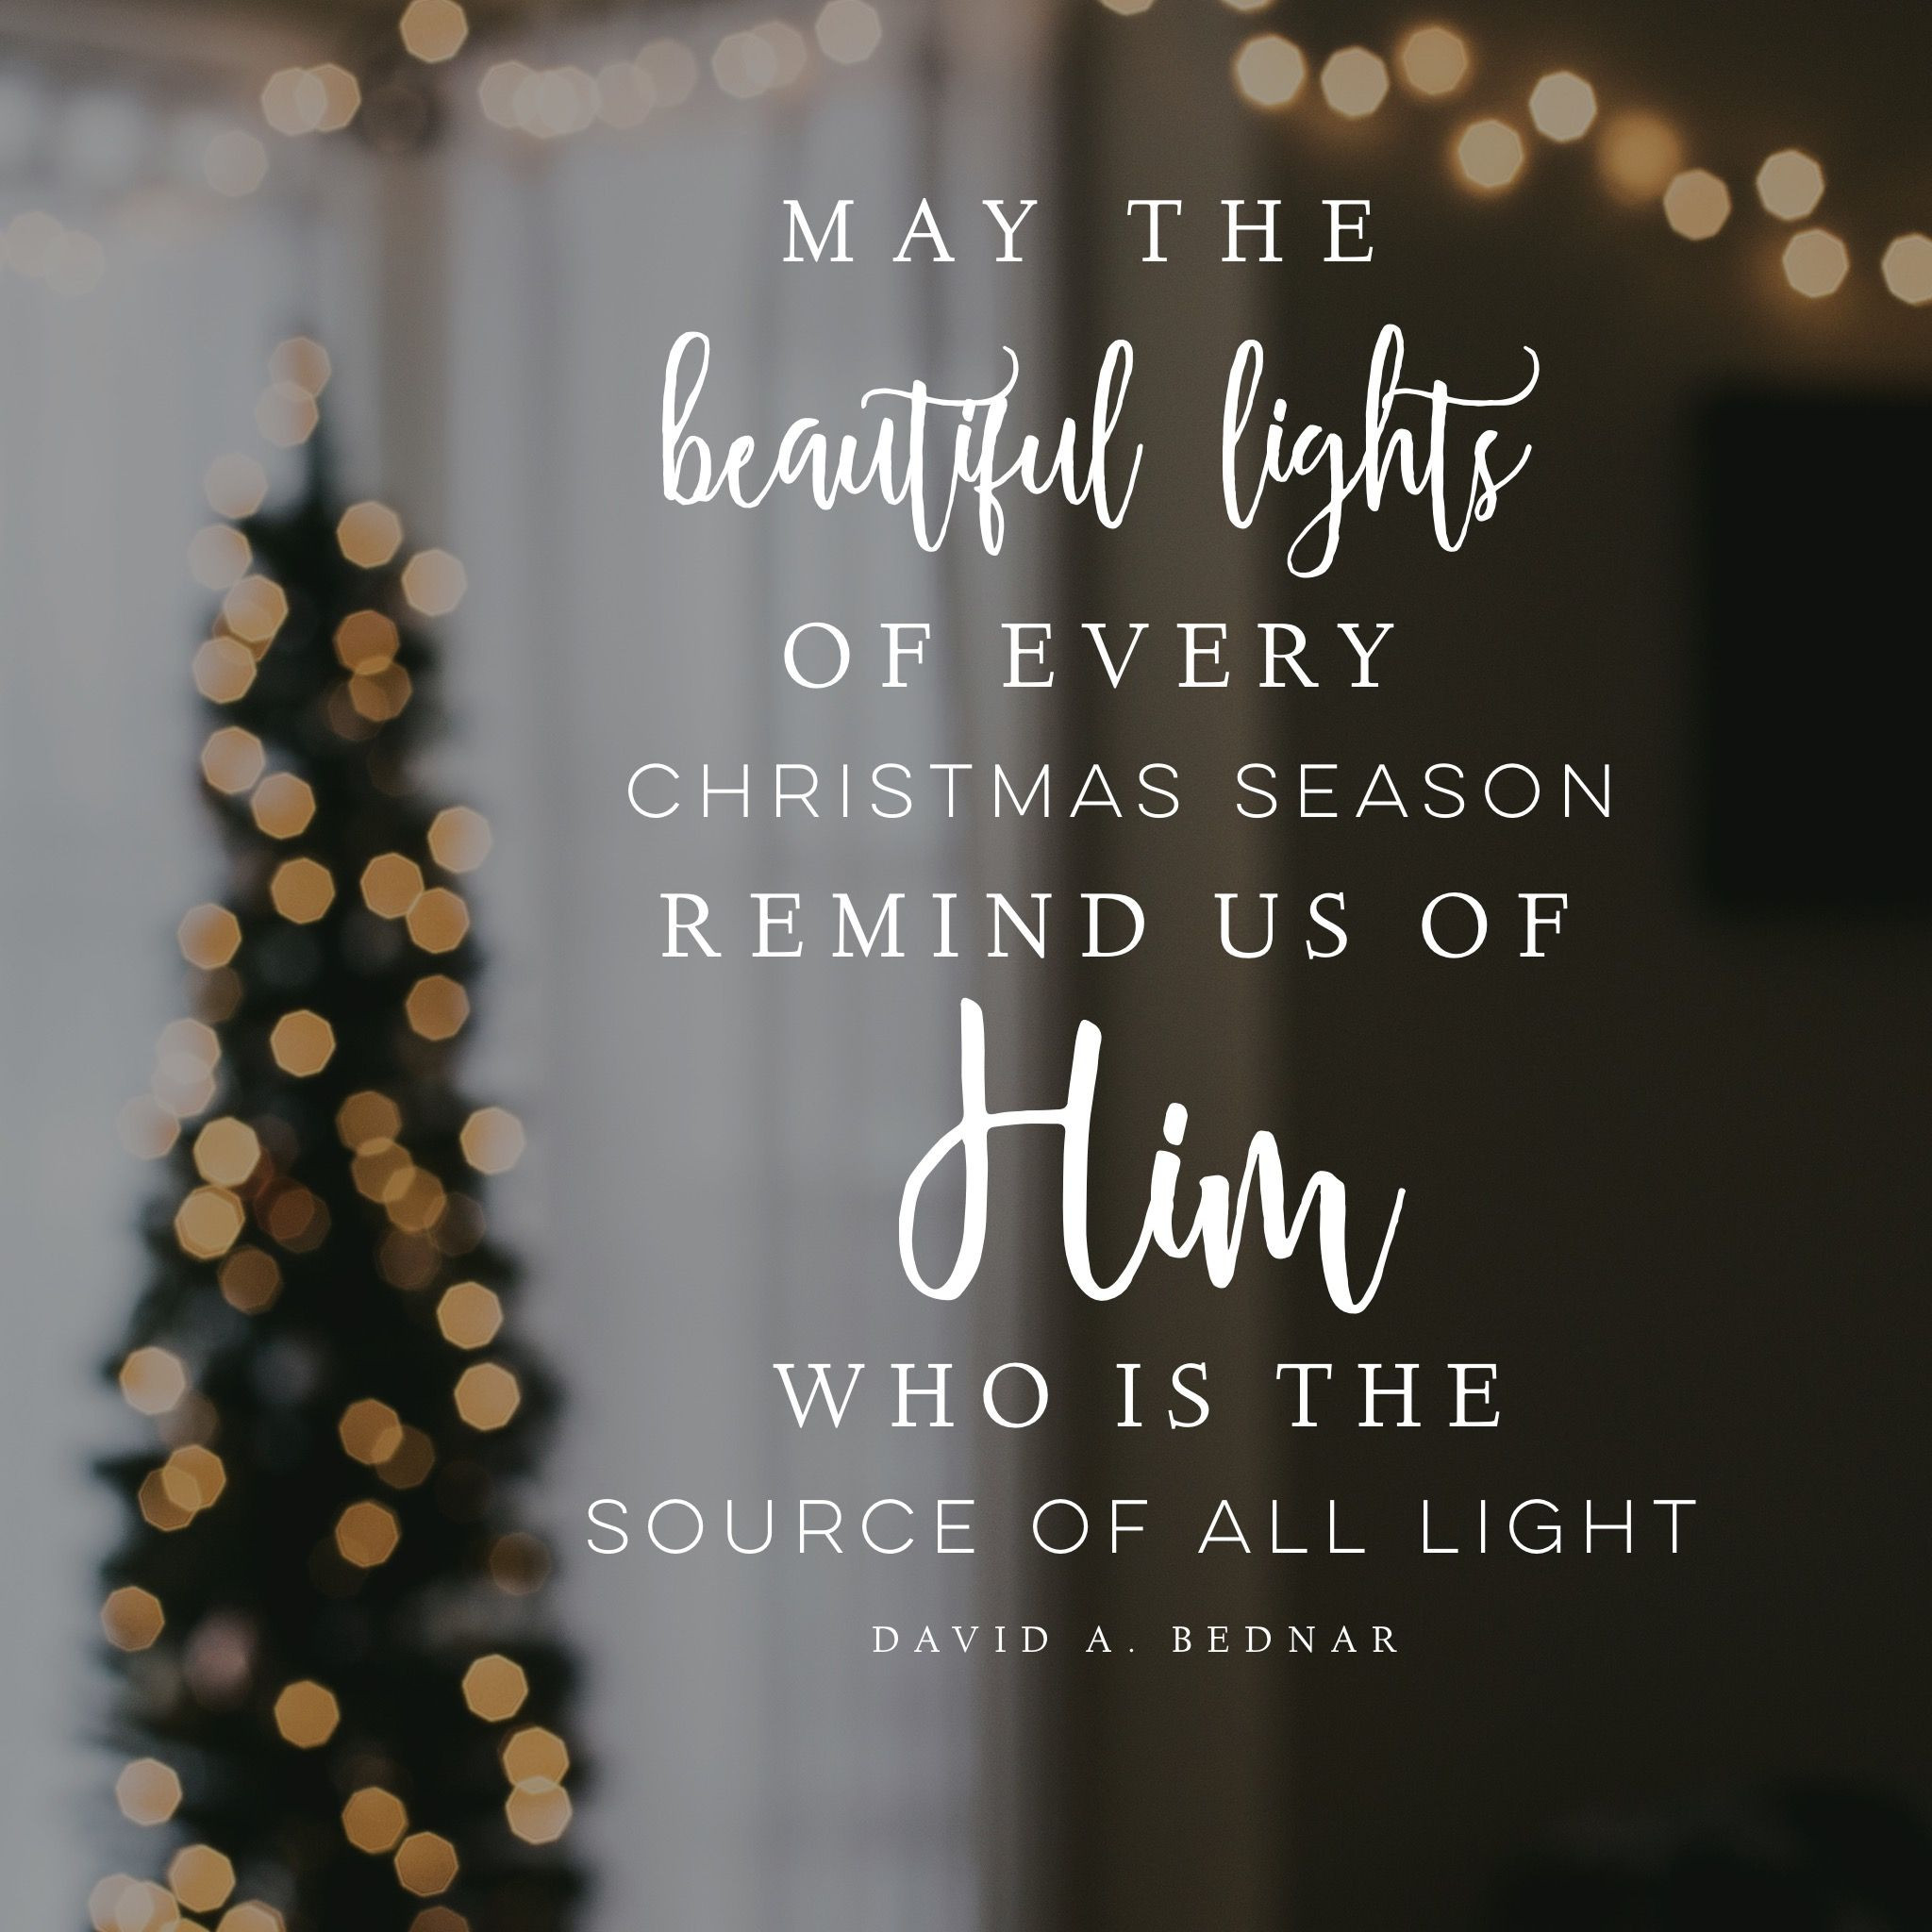 Christmas Quote Christian
 "May the beautiful lights of every Christmas season remind